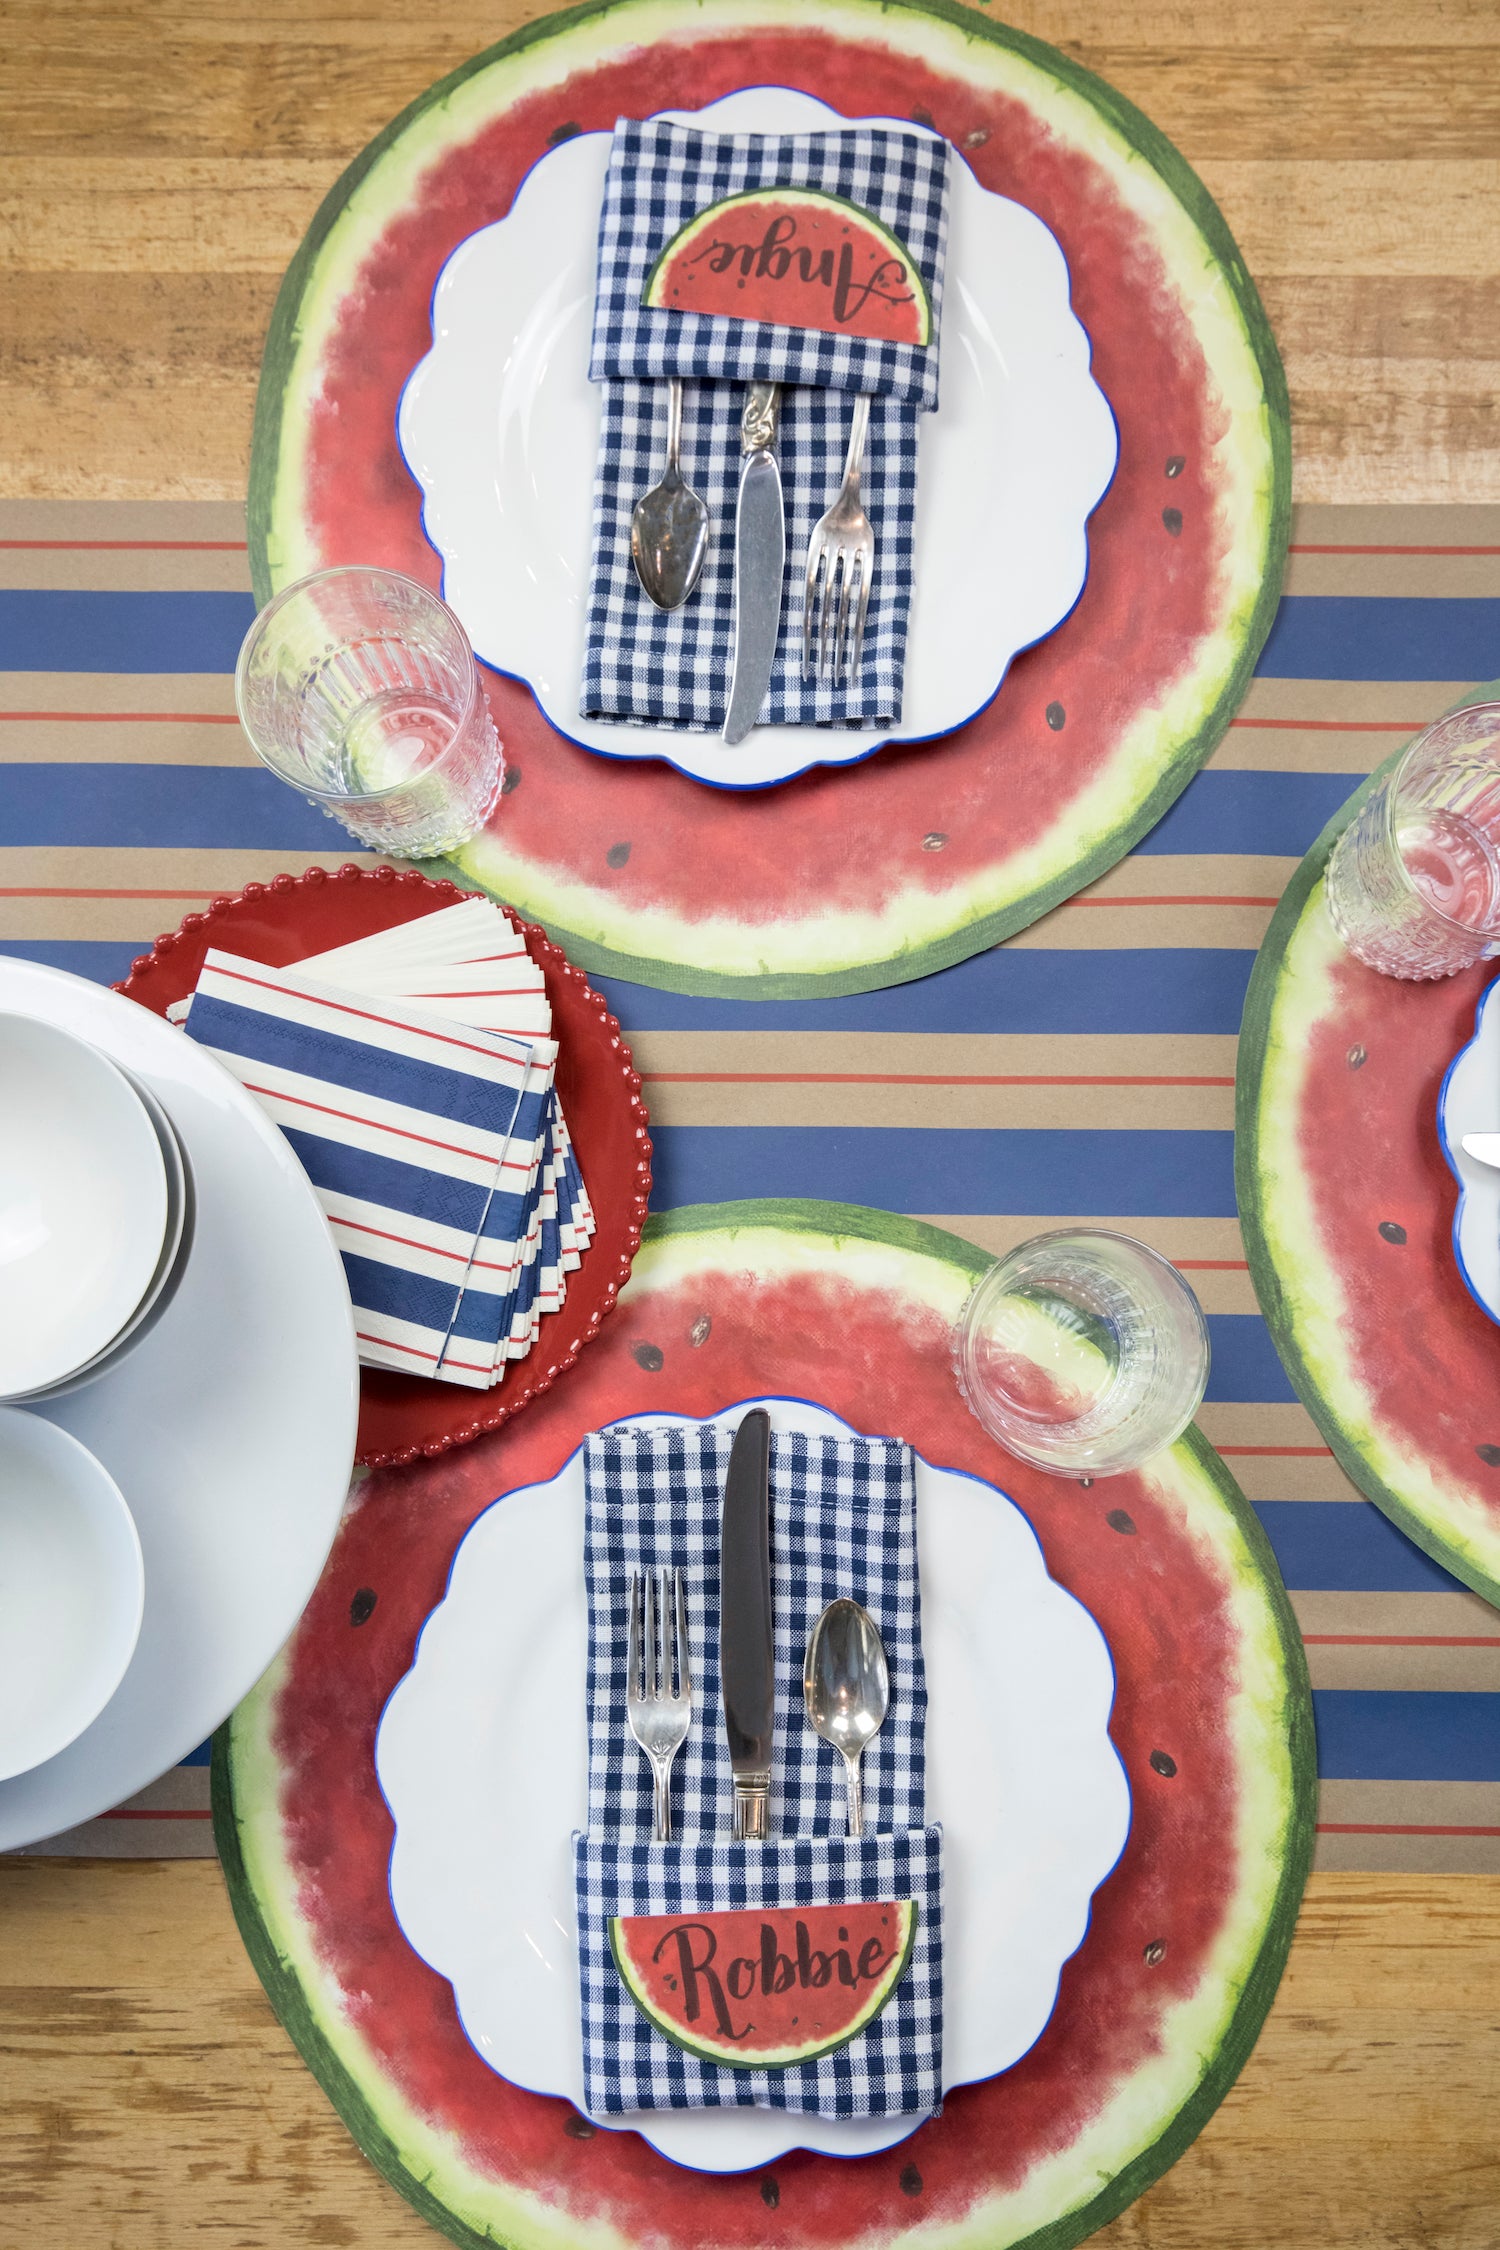 The Kraft Navy &amp; Red Awning Stripe Runner under a summertime table setting, from above.